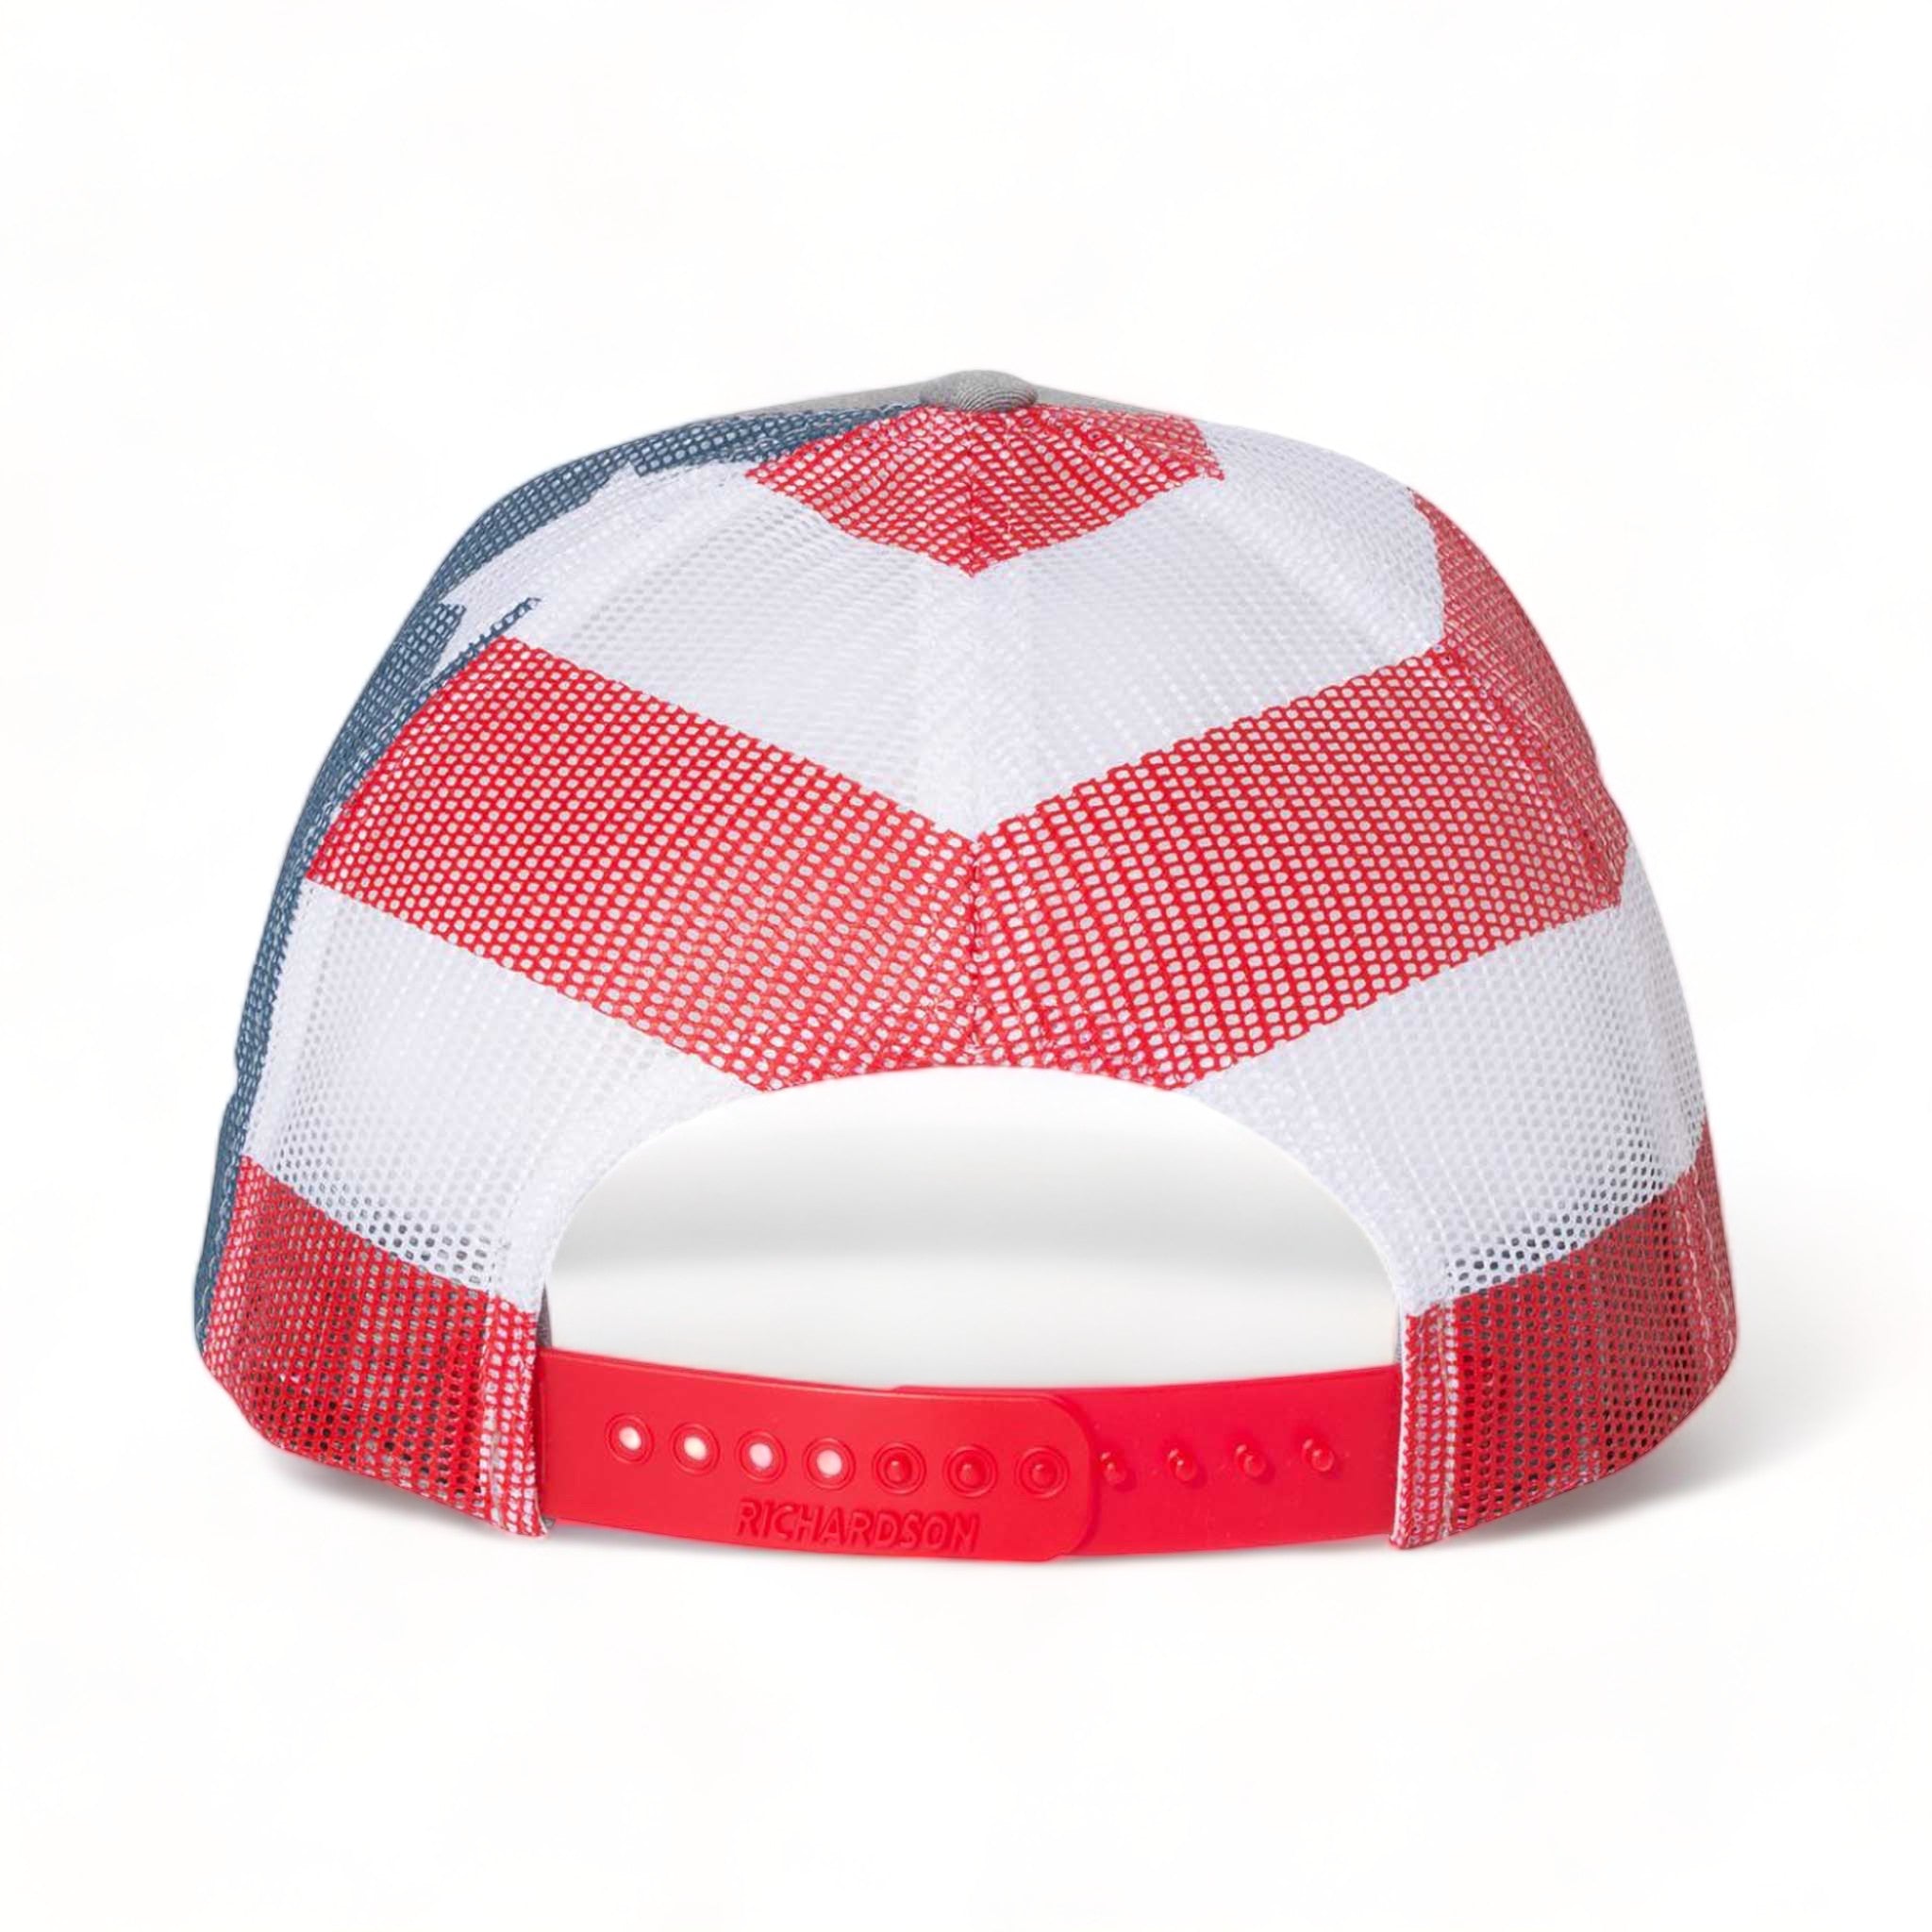 Back view of Richardson 112PM custom hat in heather grey and stars & stripes